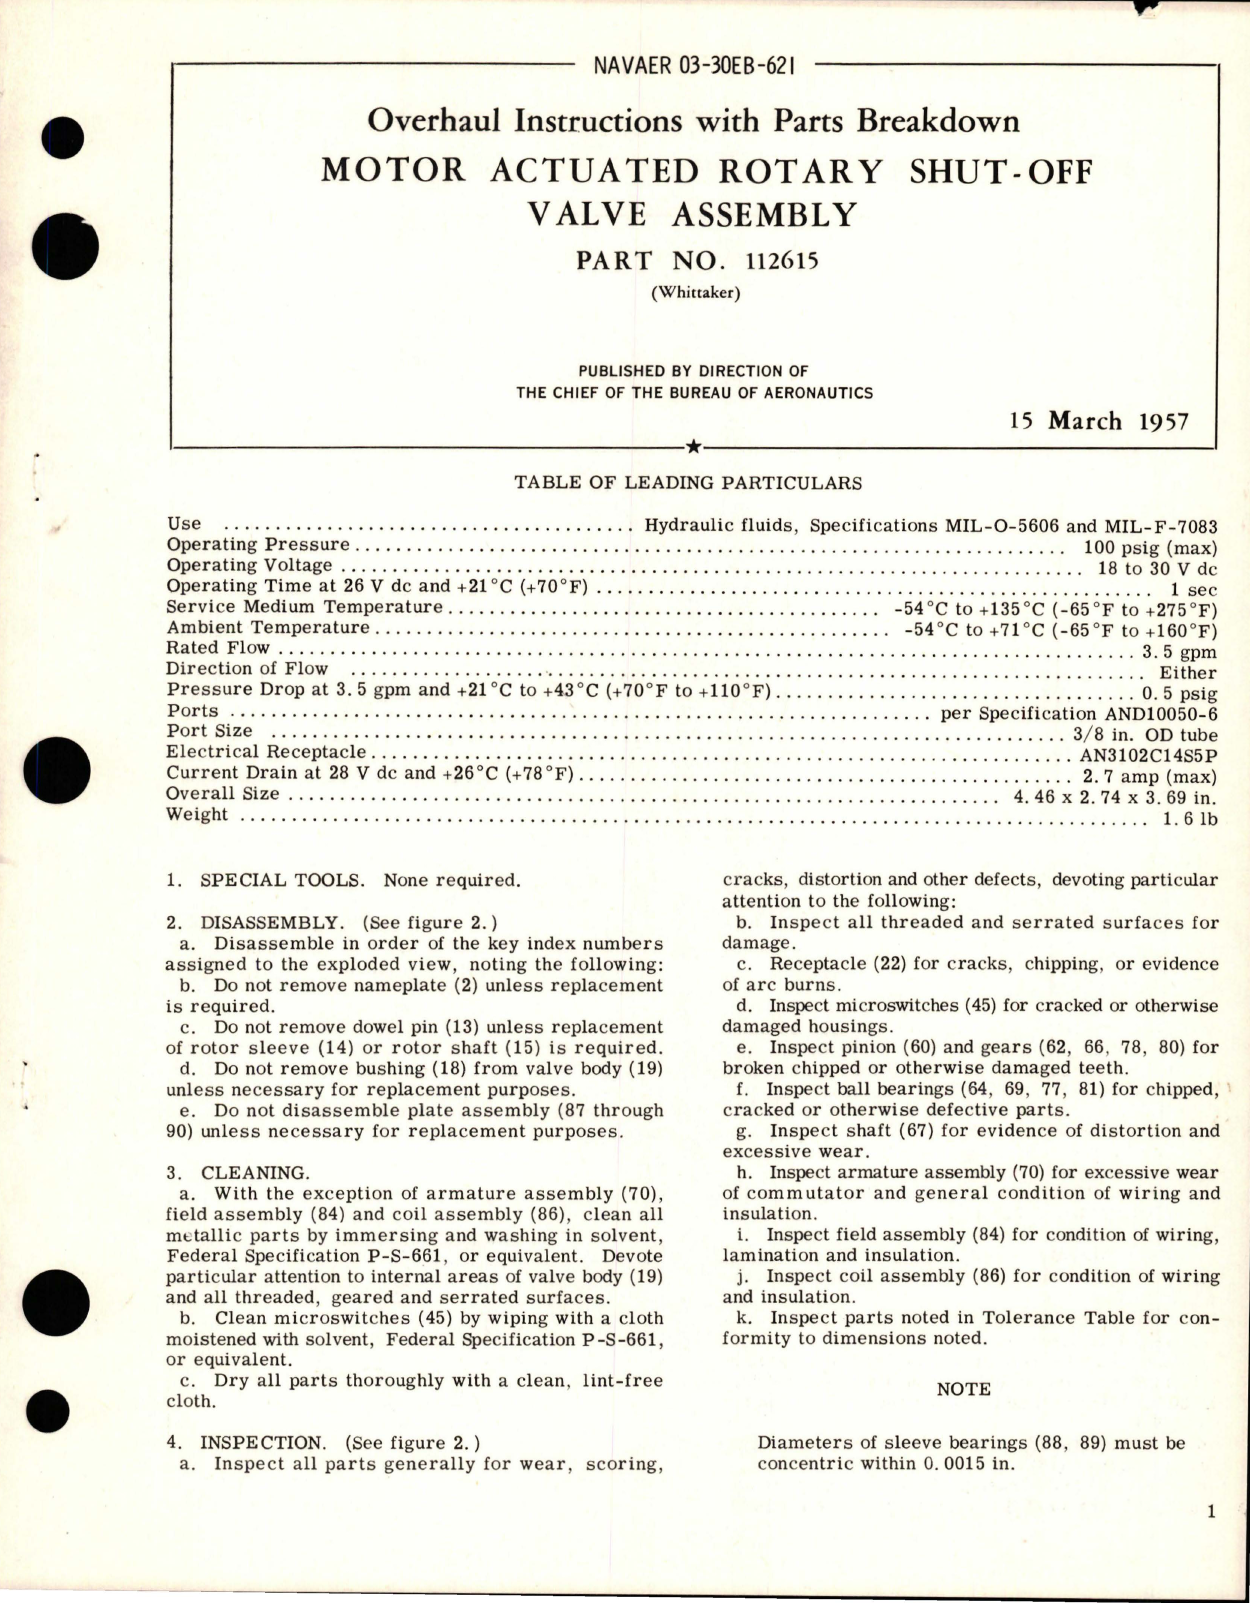 Sample page 1 from AirCorps Library document: Overhaul Instructions with Parts Breakdown for Motor Actuated Rotary Shut-Off Valve Assembly - Part 112615